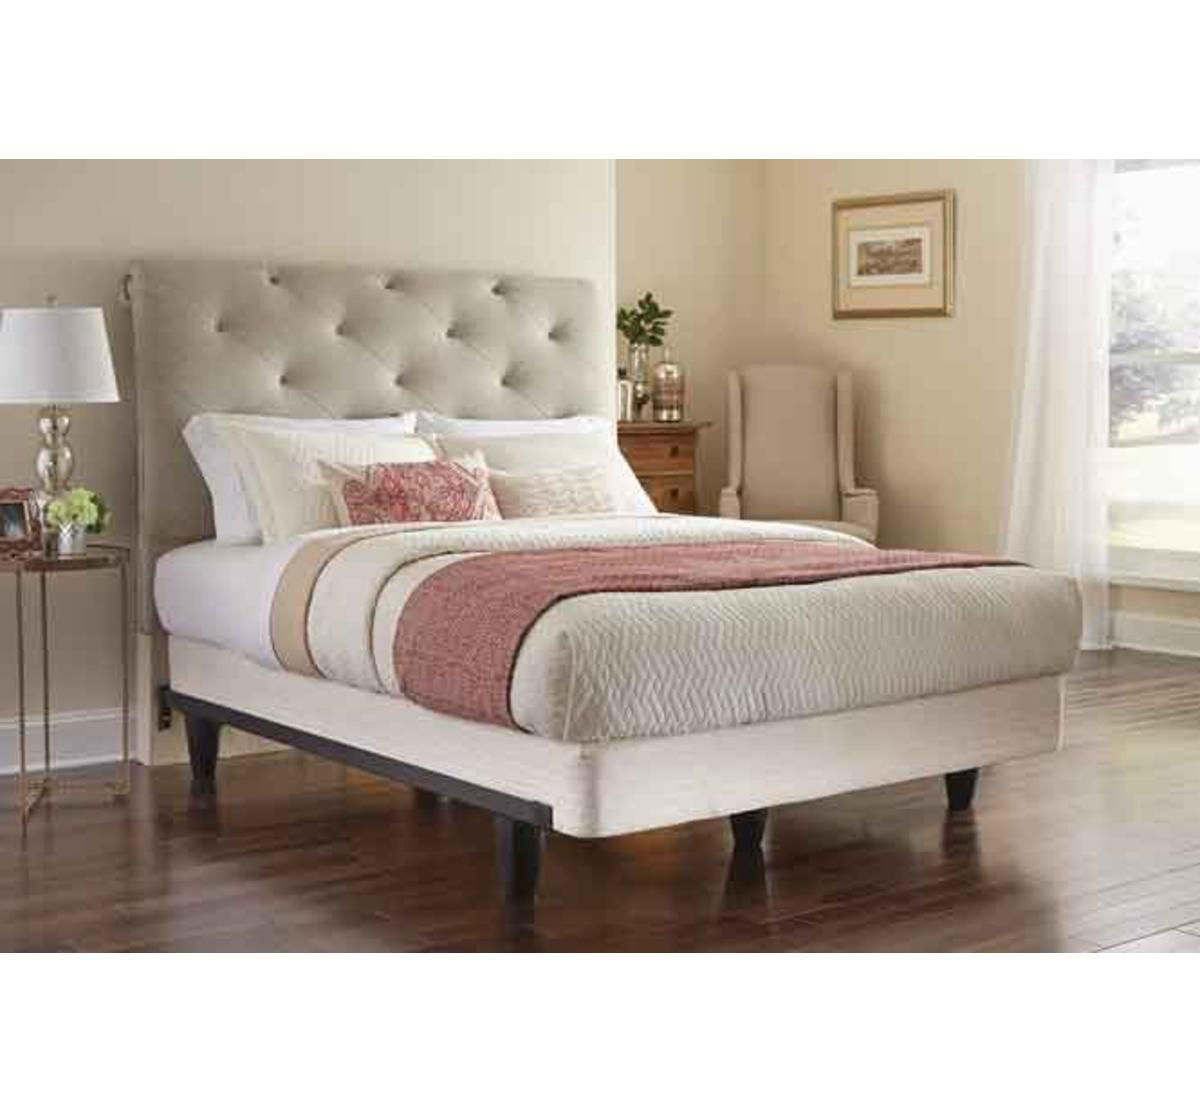 The Engauge Queen Bed Frame Bad, What Size Is A Queen Mattress Frame